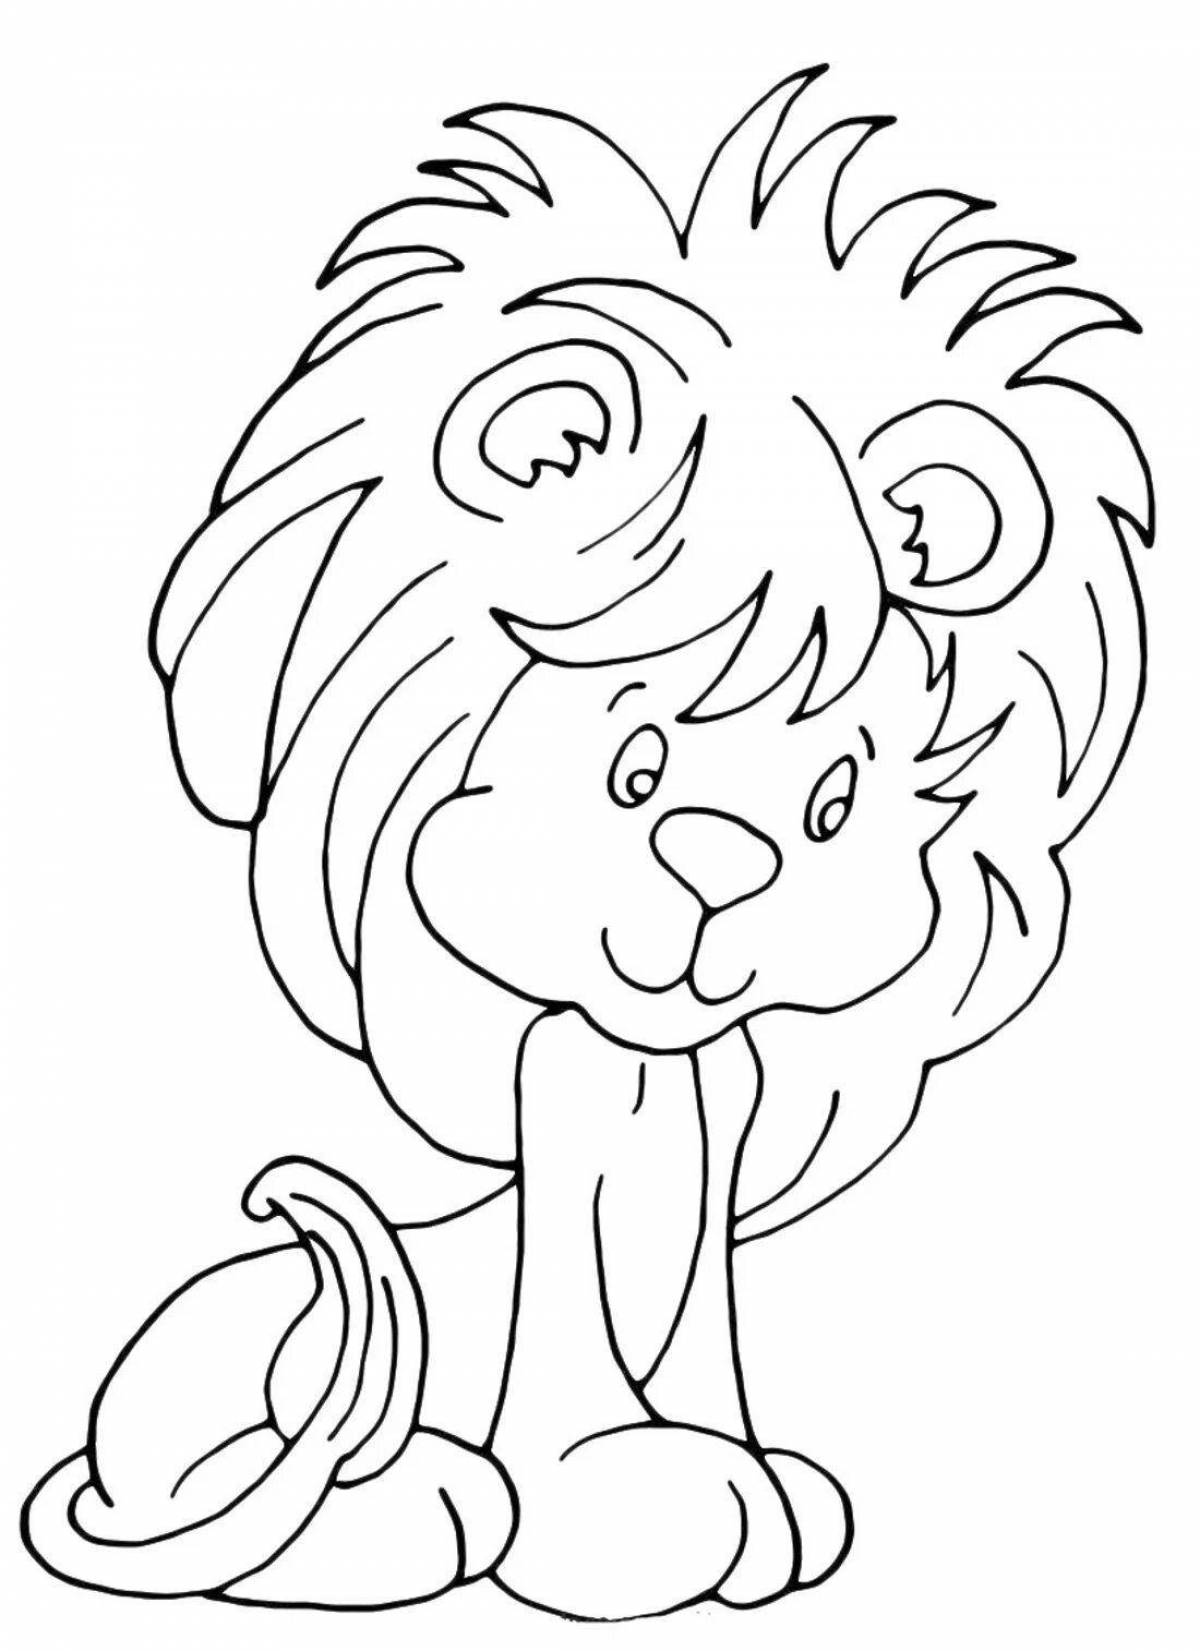 Sweet lion coloring page